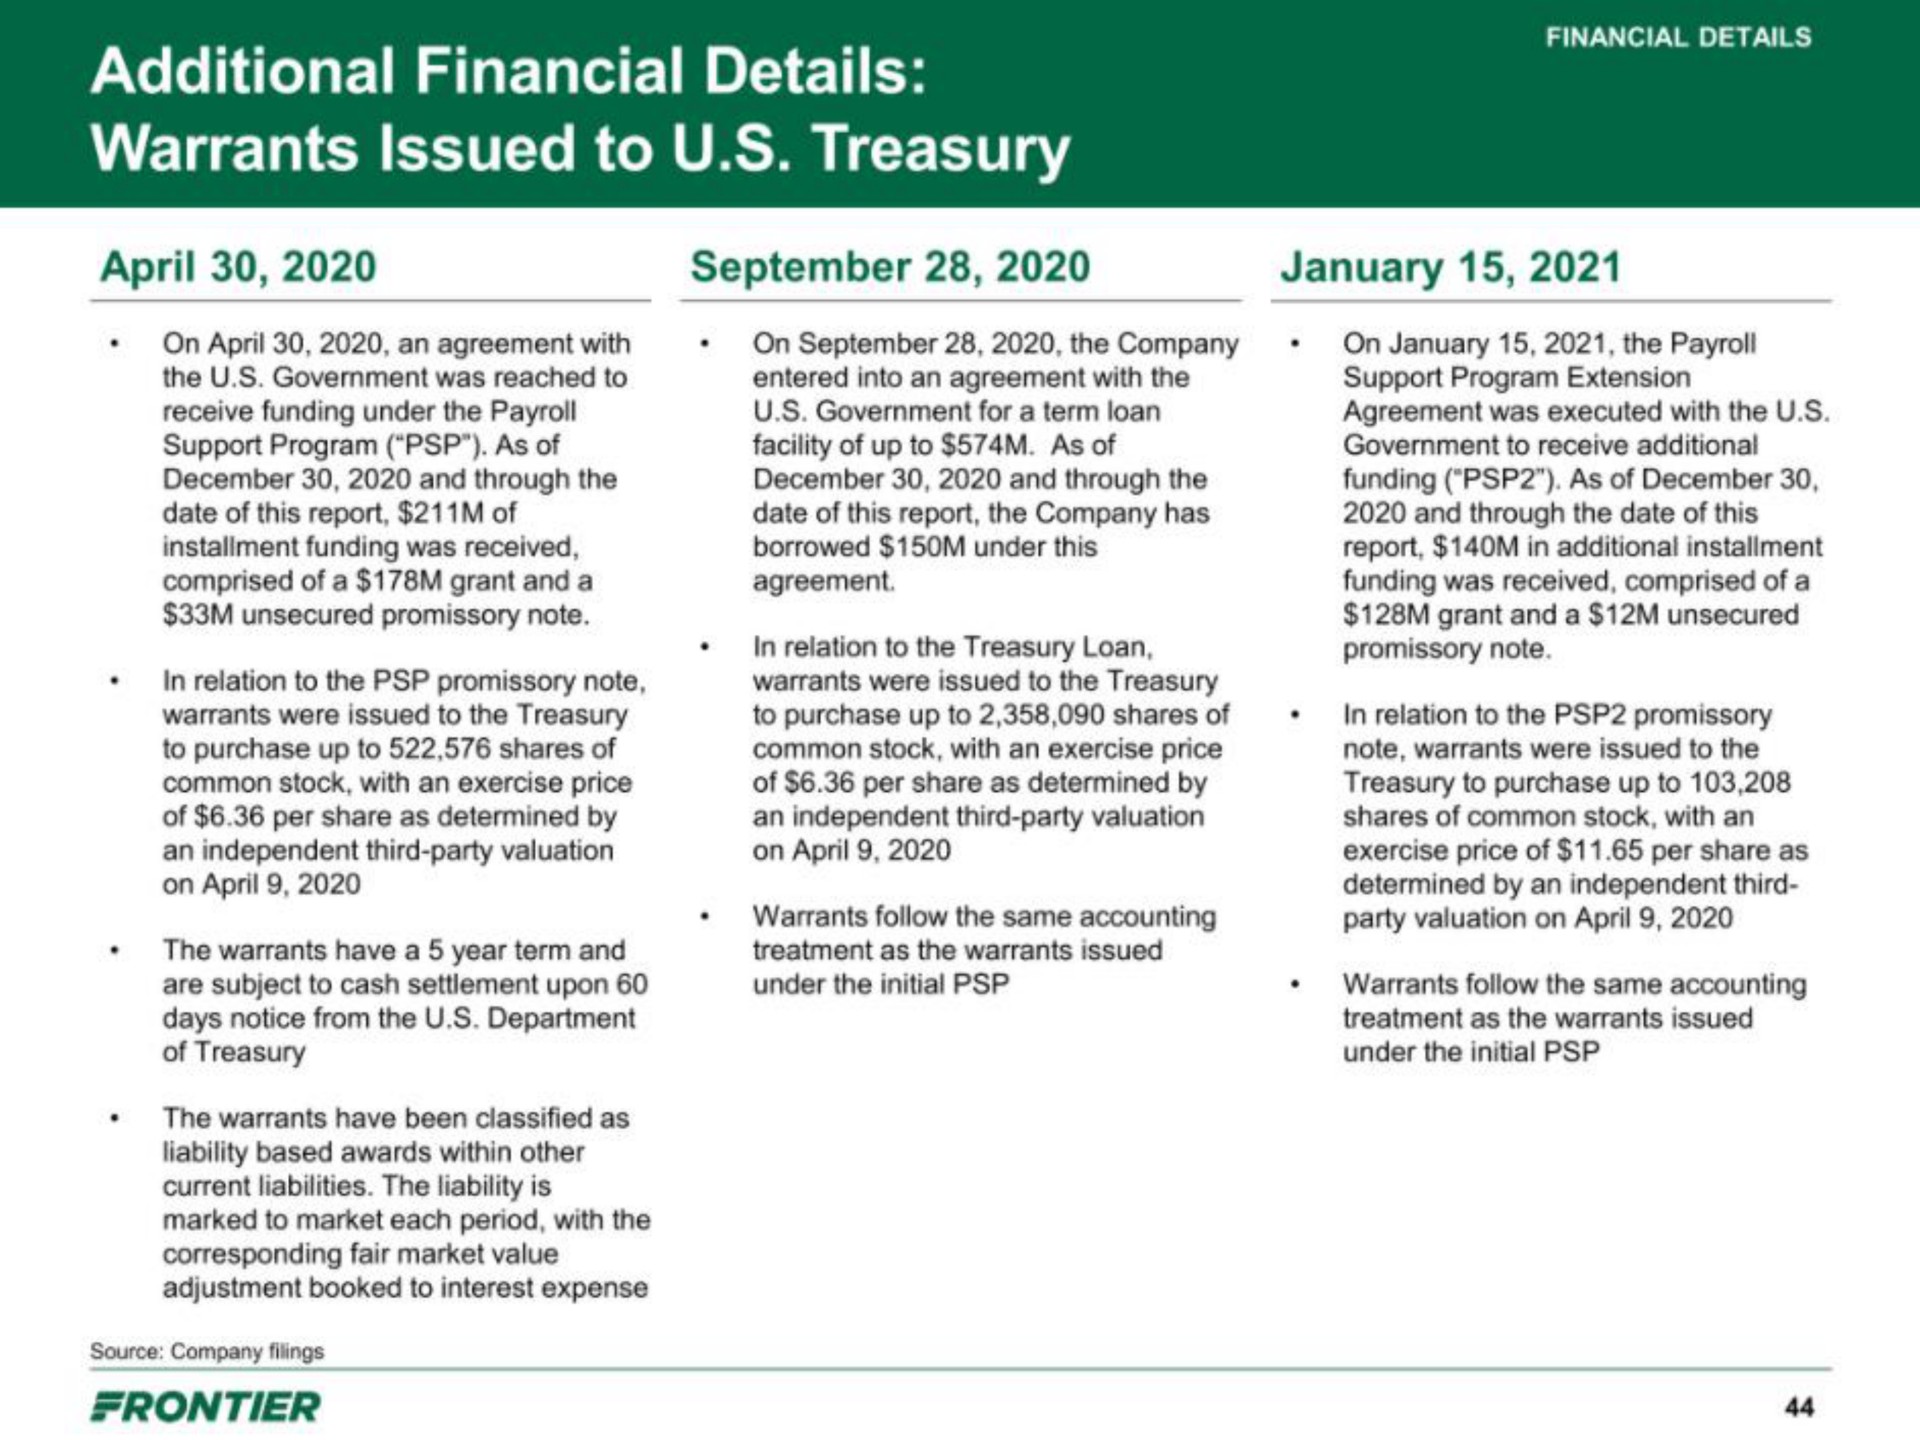 additional financial details warrants issued to treasury | Frontier